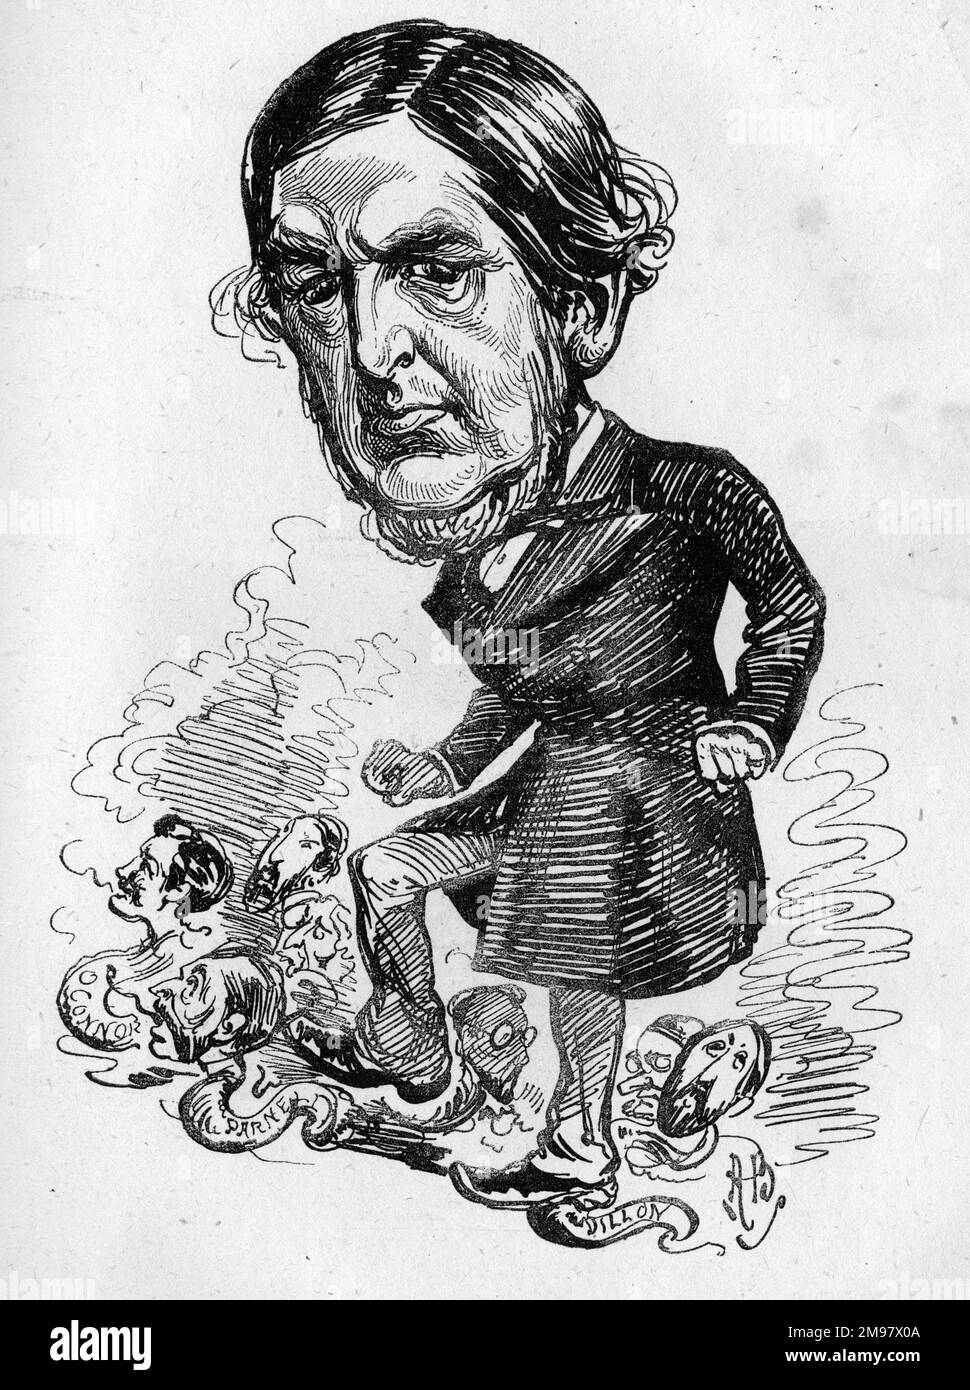 Cartoon of Sir William George Granville Venables Vernon Harcourt (1827-1904), Liberal politician, at this time Home Secretary in Gladstone's government. Seen here stamping out Irish agitators in the form of snakes (a nest of vipers) under his feet. Stock Photo